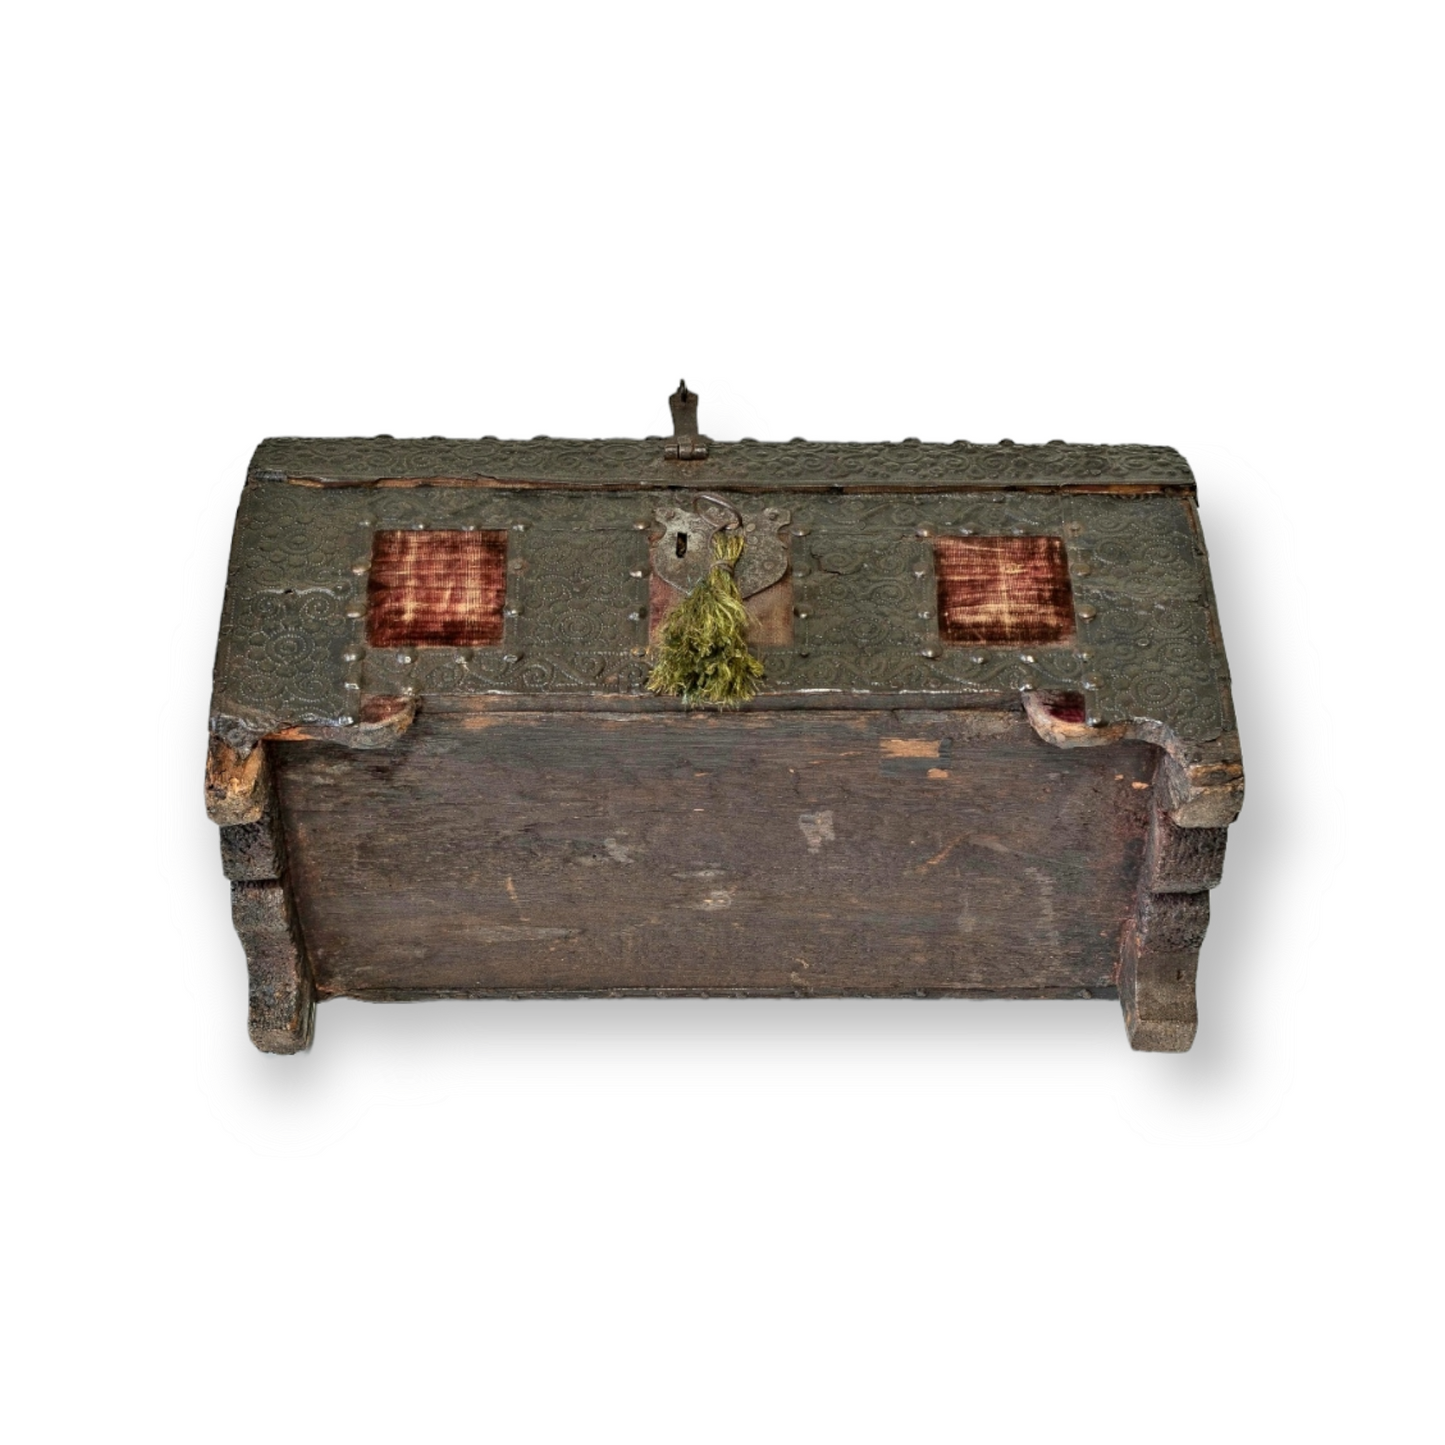 A 17th Century Iberian Antique Repousee-Worked Sheet Iron And Velvet Covered Table Casket, Circa 1650-90